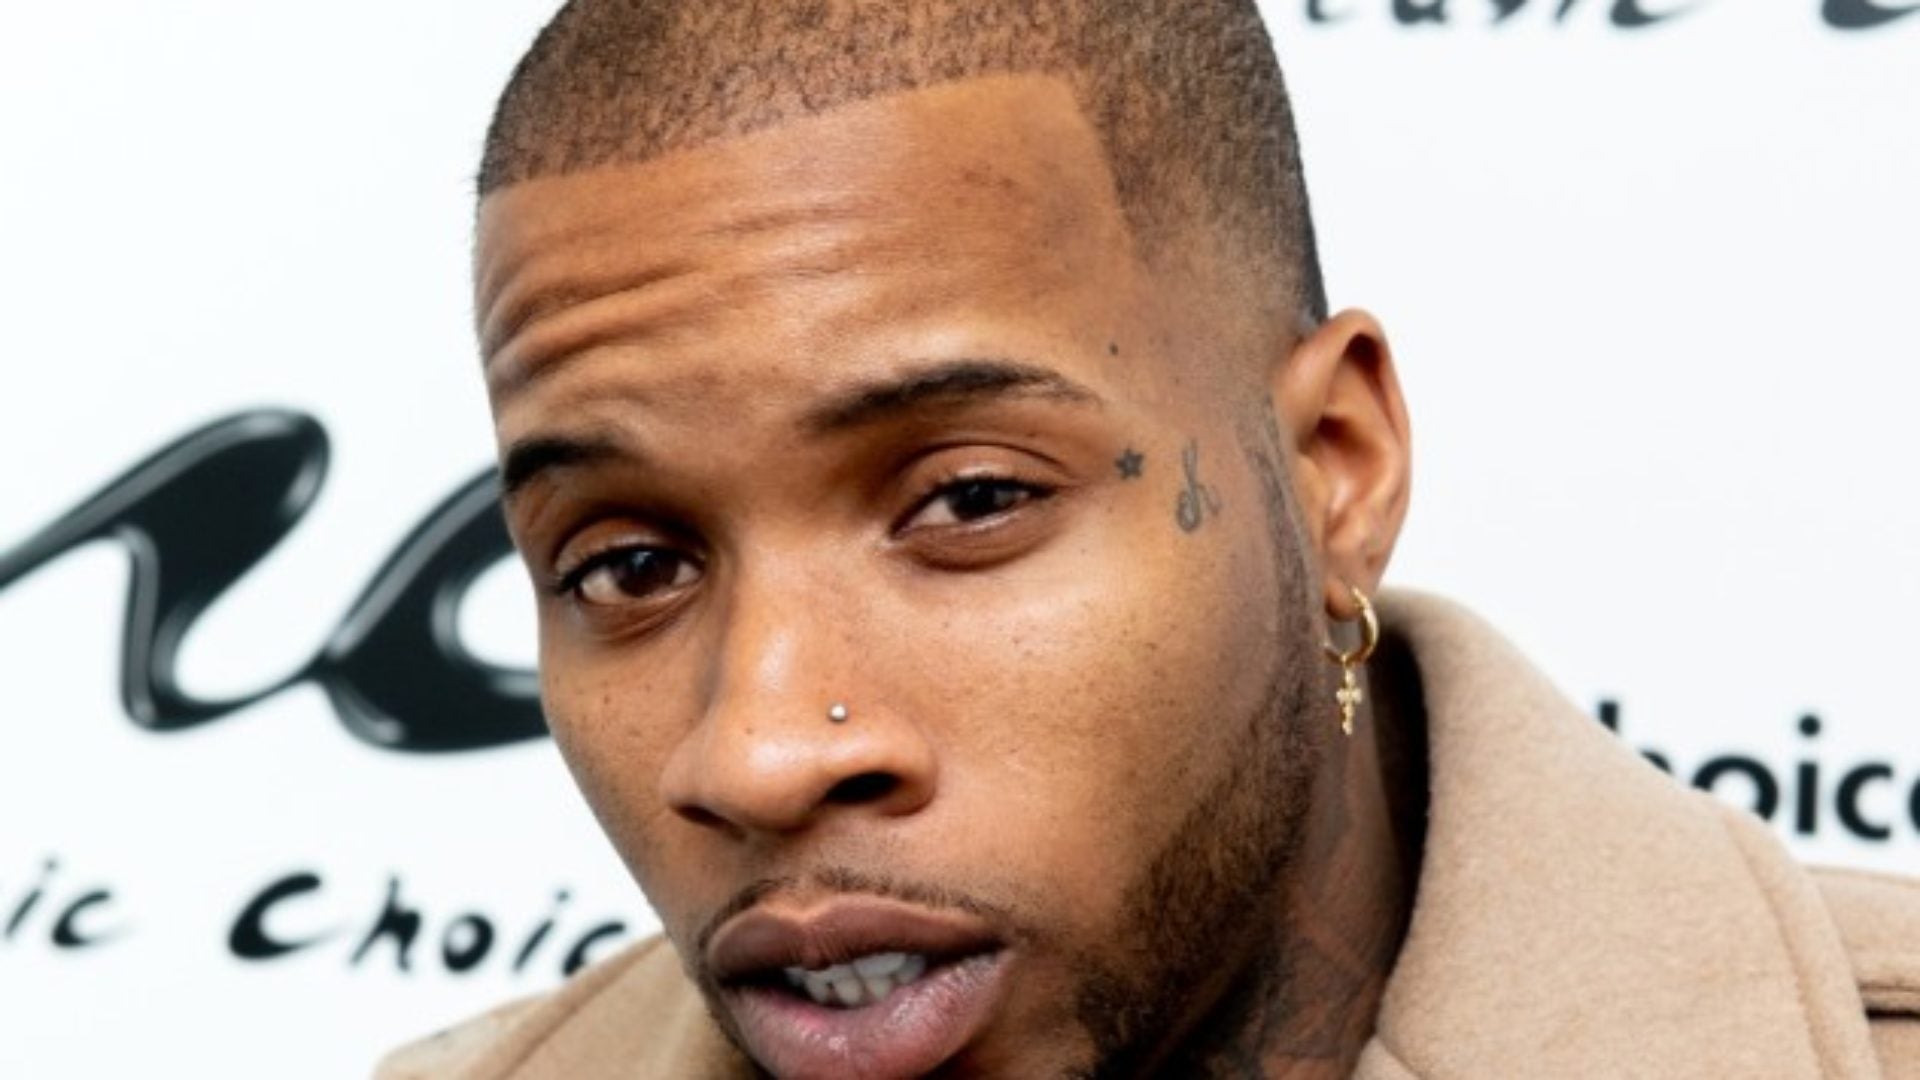 How Much Is A New Hairline Worth? For Torey Lanez, It's Nearly Priceless